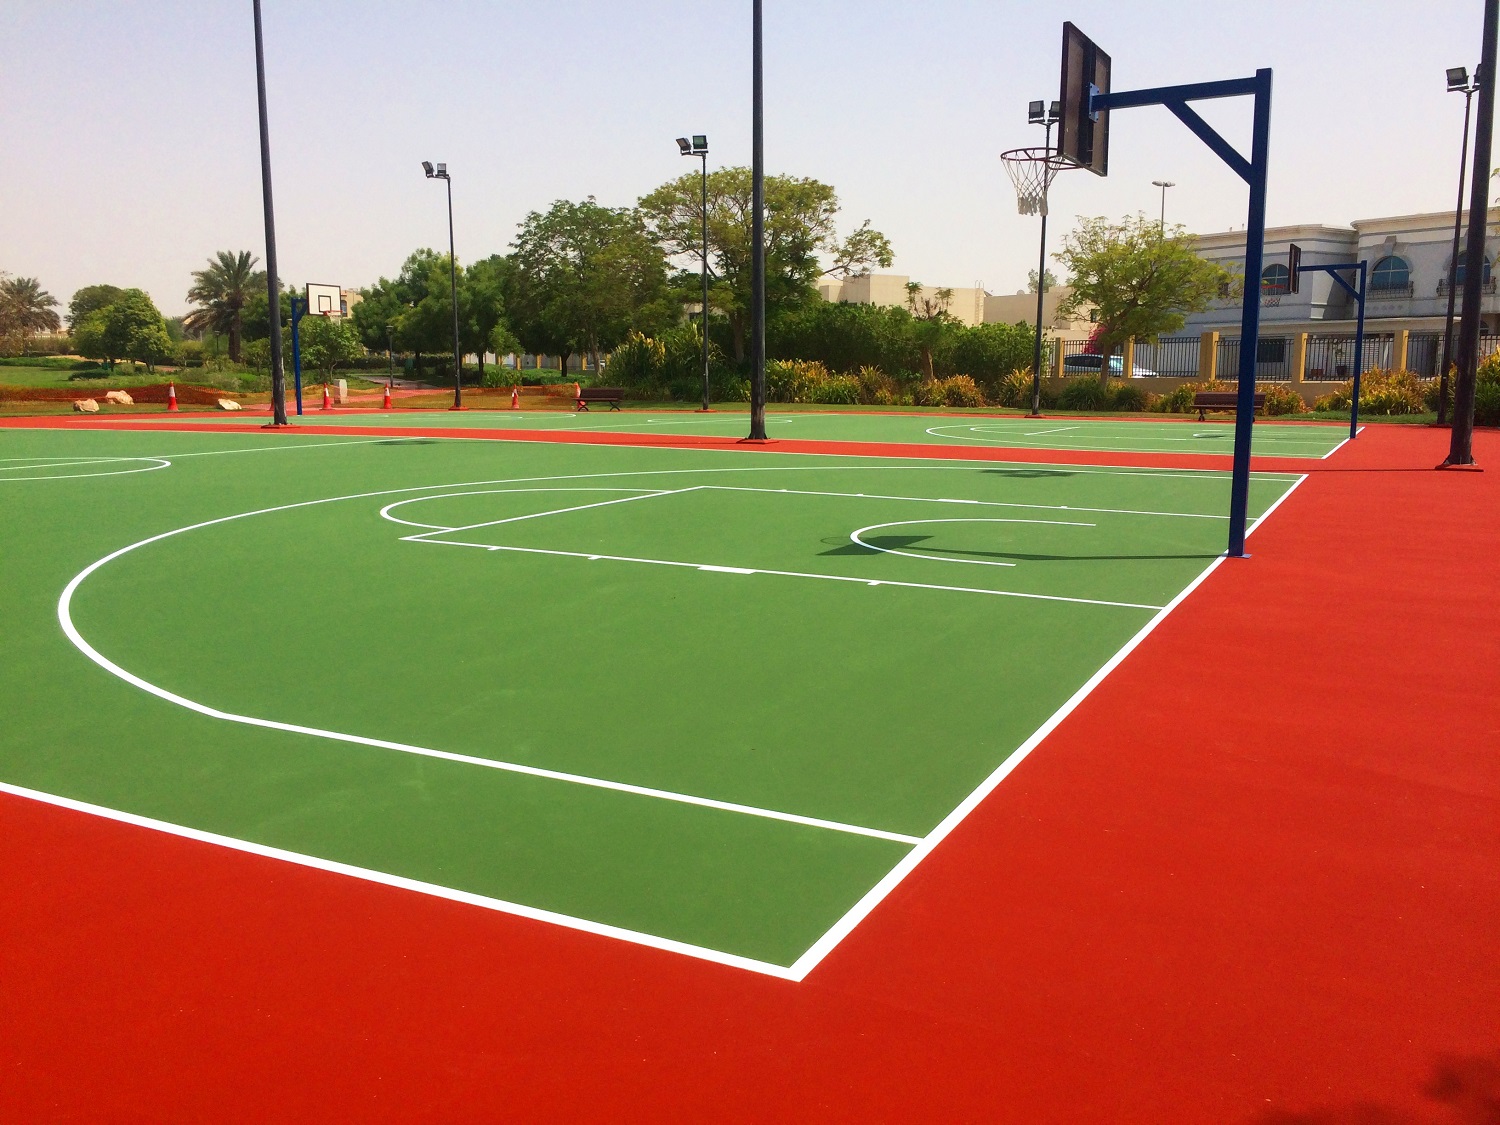 The sports courts